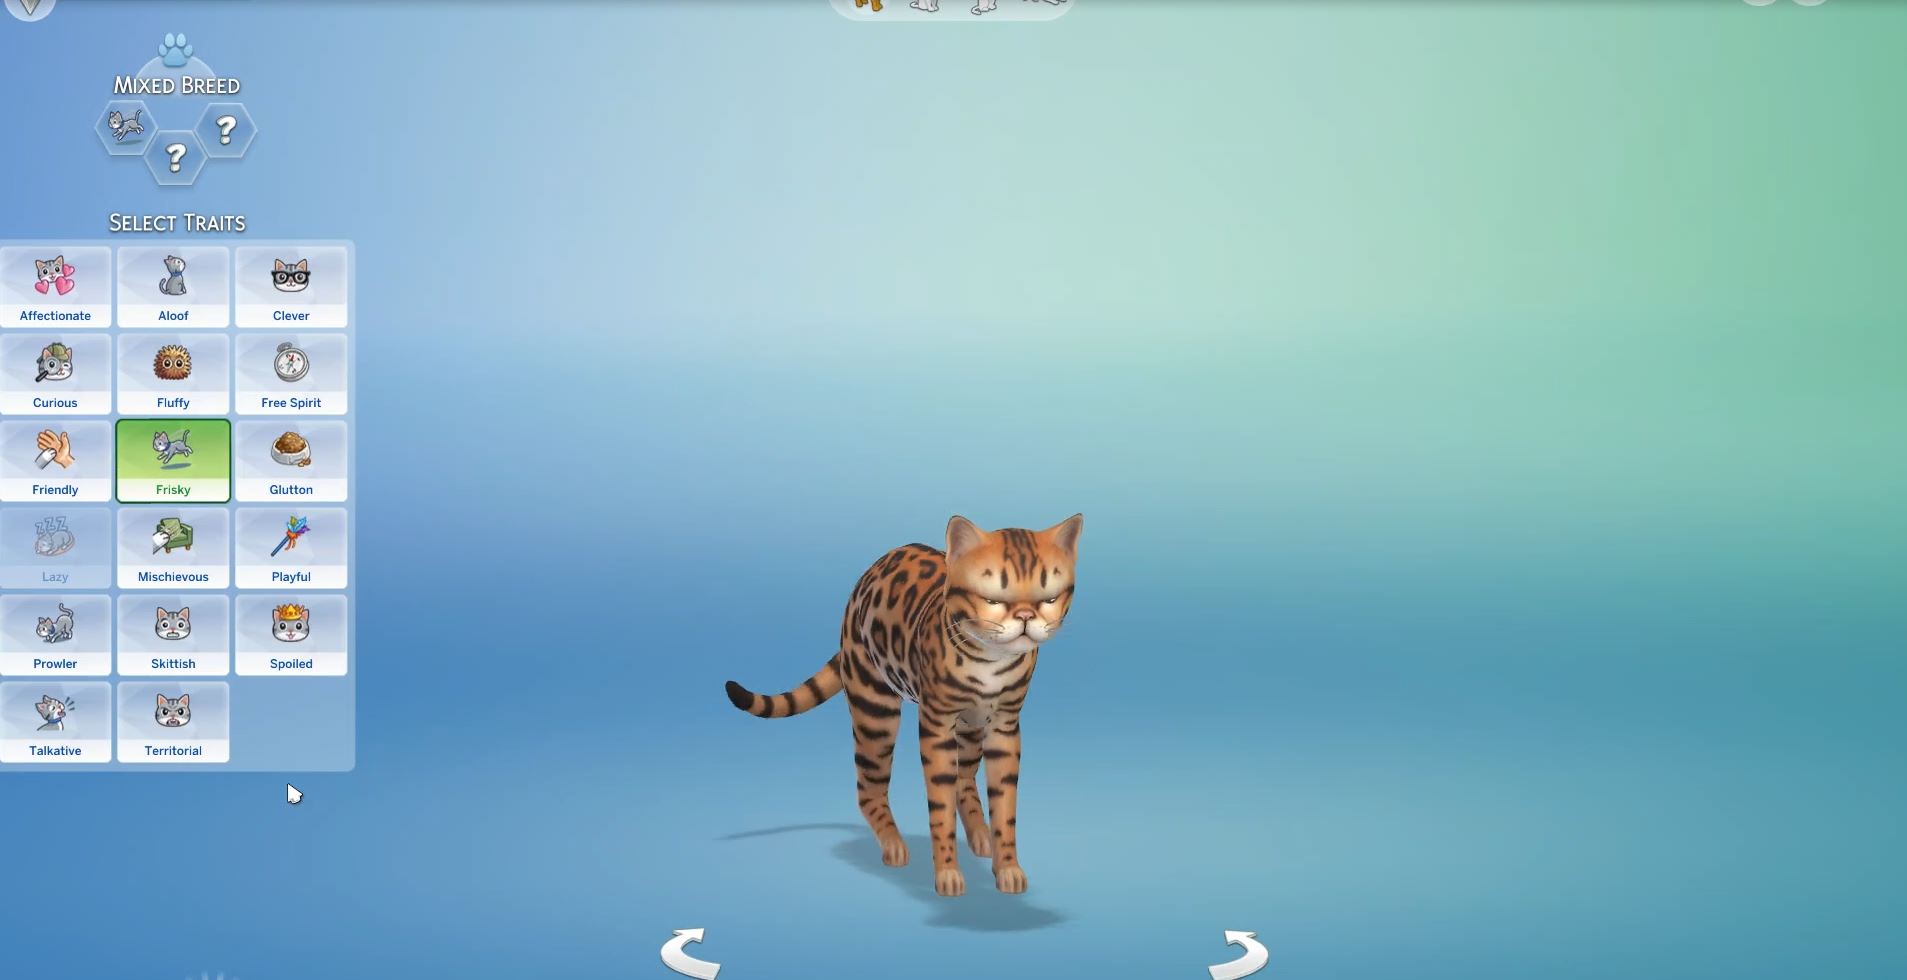 sims 4 cats and dogs list of animal traits